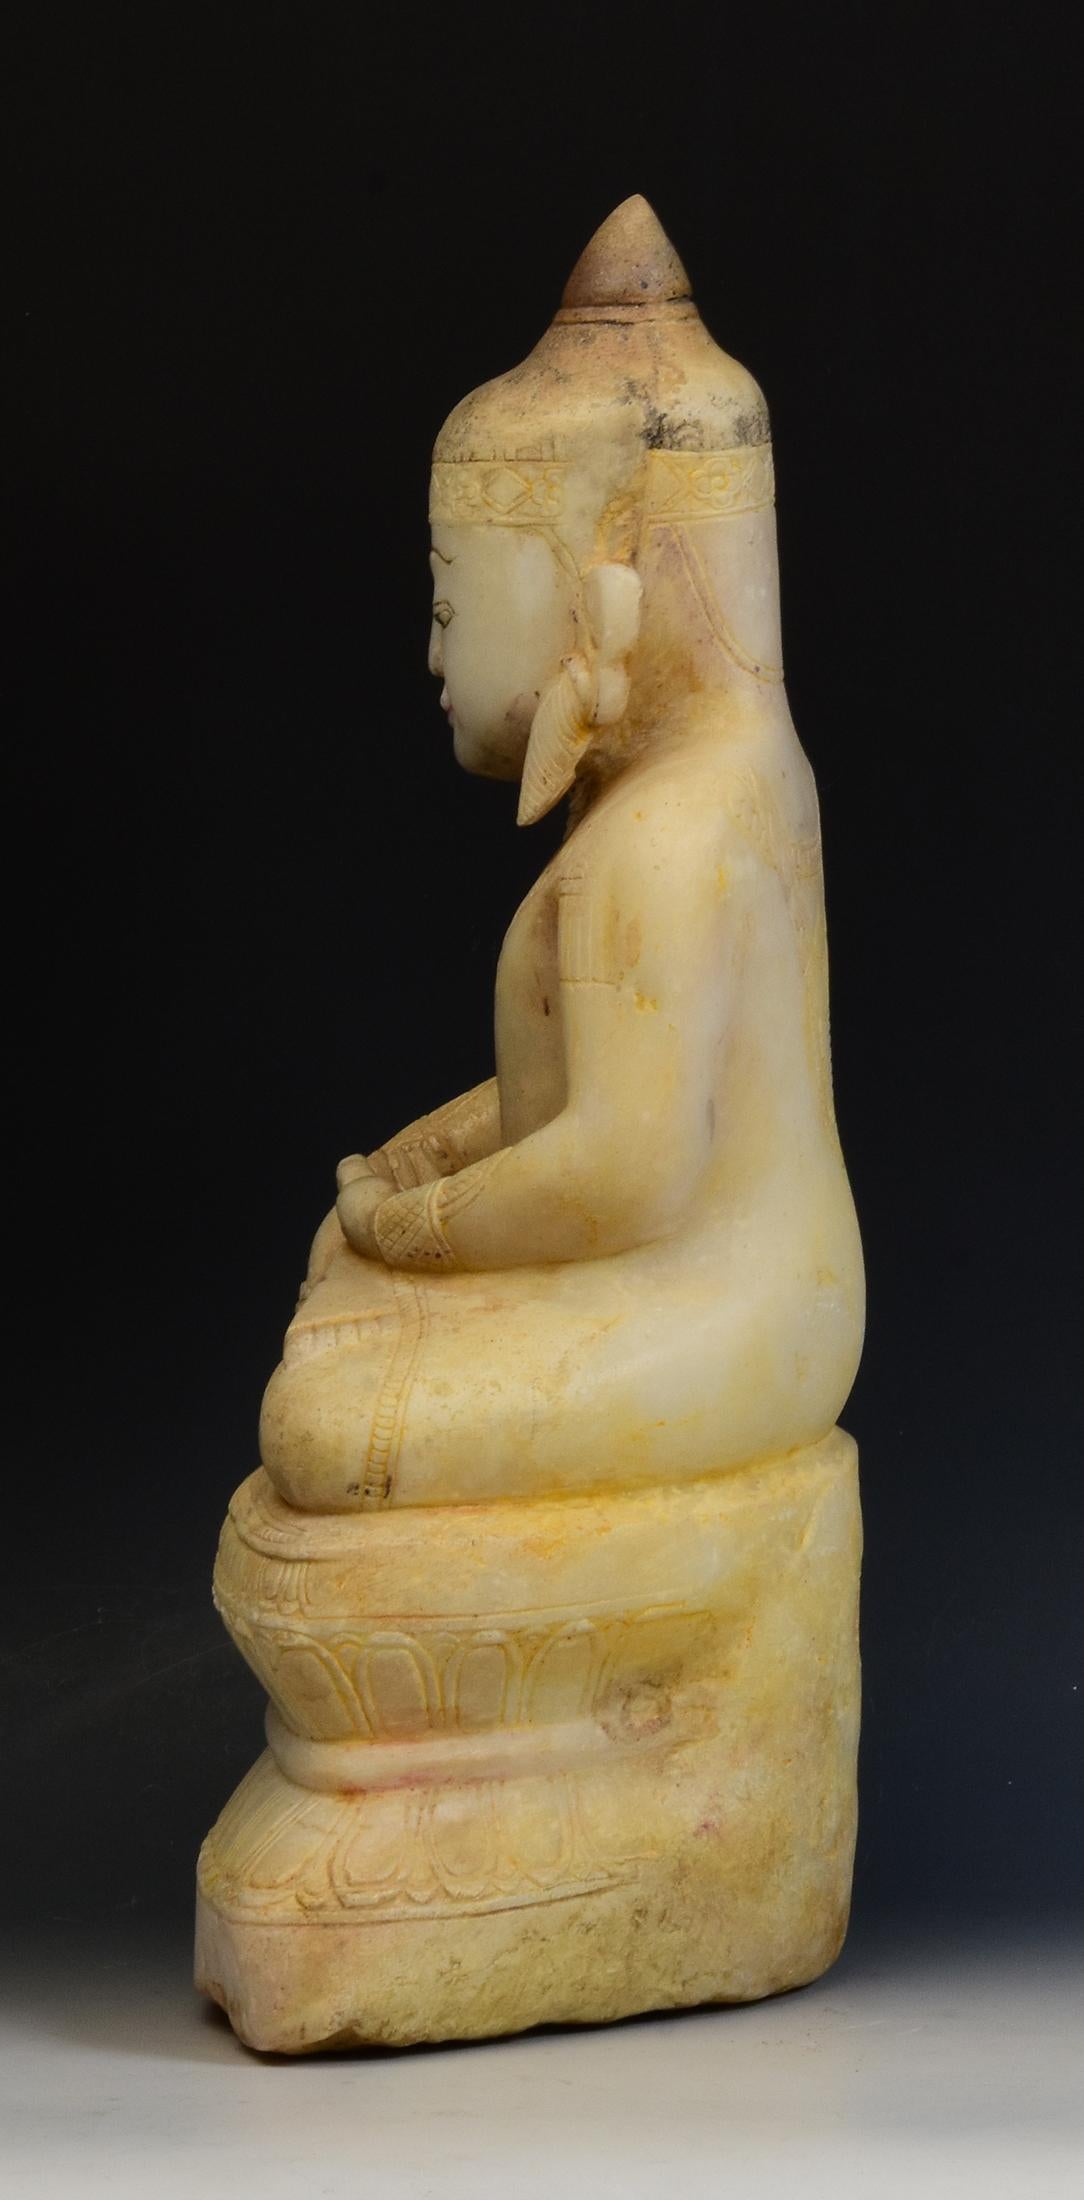 15th Century, Ava, Antique Burmese Alabaster Marble Seated Crowned Buddha Statue 9